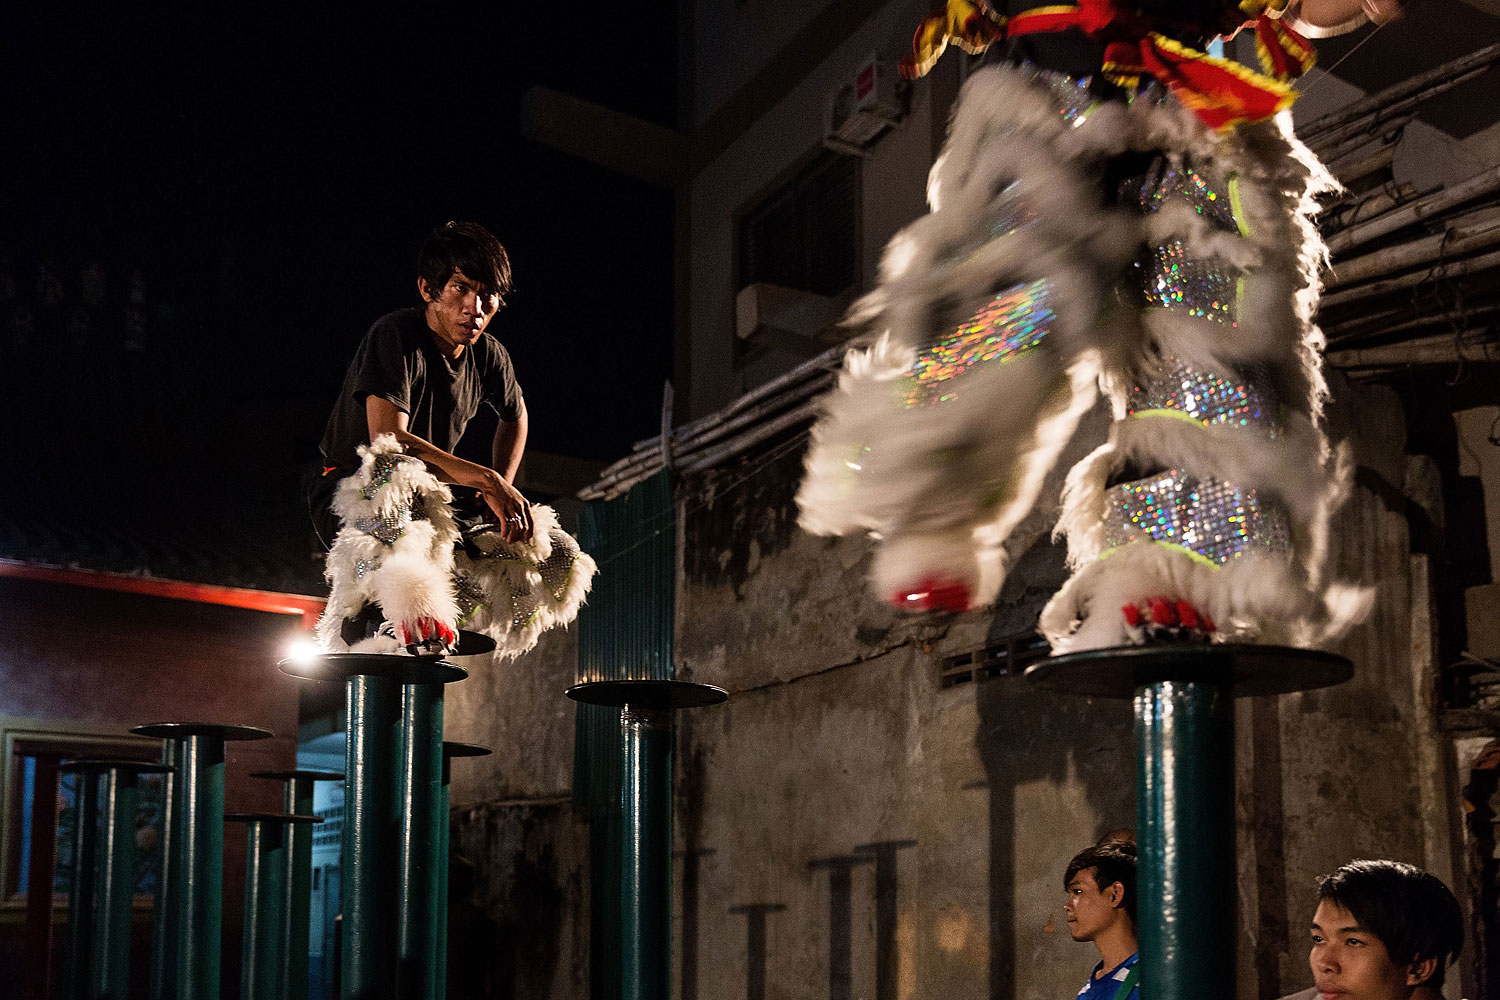 A Lion Dancer takes a break during a practice session on Jan. 29, 2014 in Phnom Penh, Cambodia.